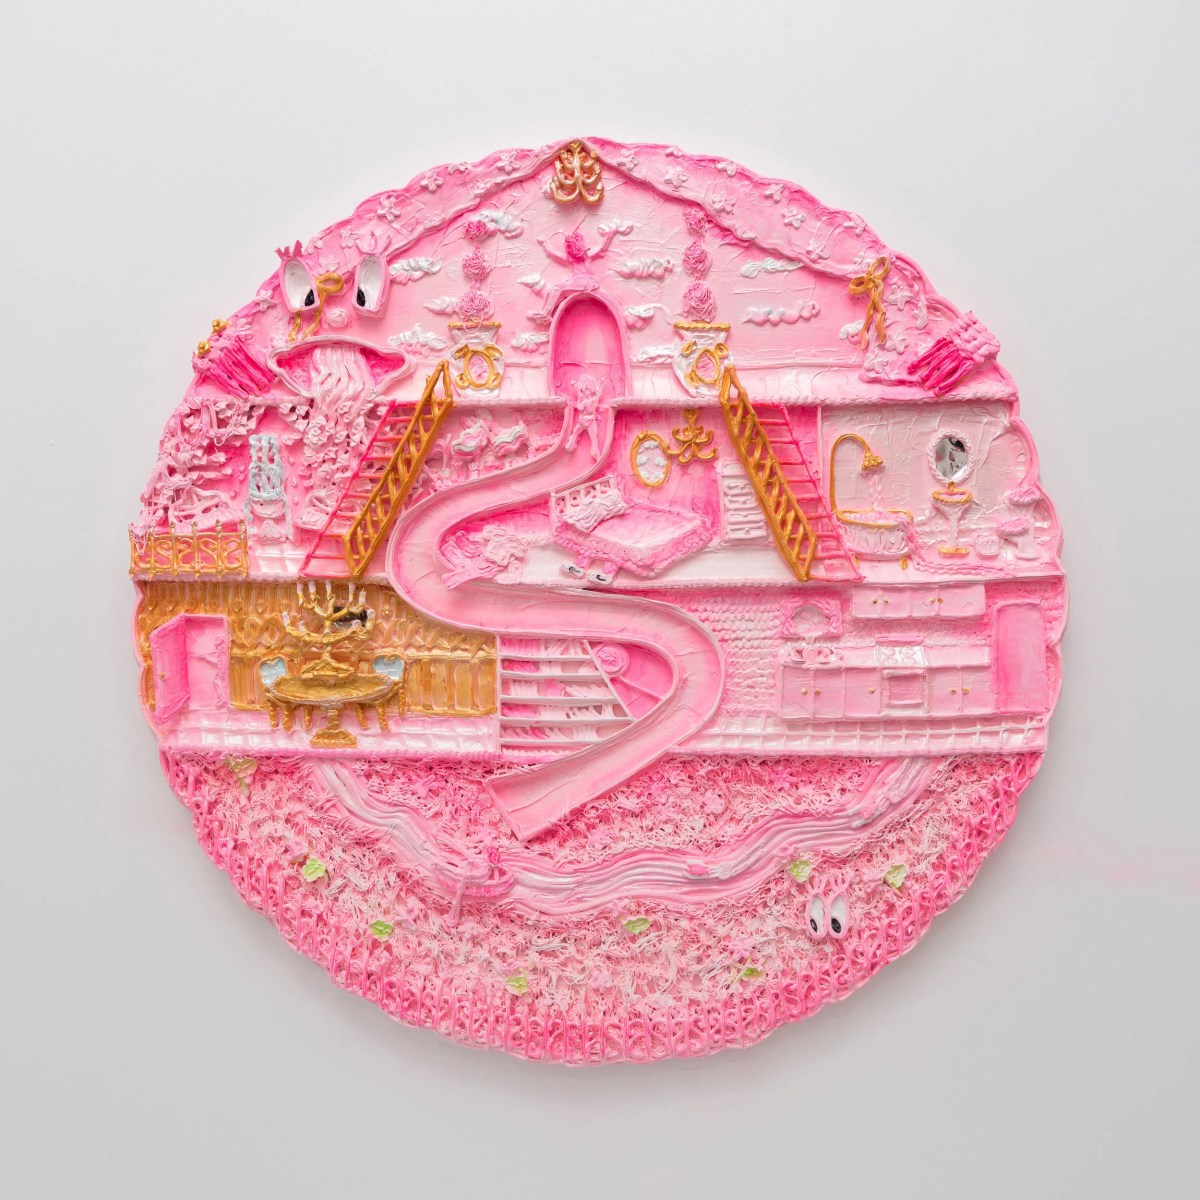 Yvette Mayorga’s Cake Decorations Critique Surveillance and Consumerism – COOL HUNTING®